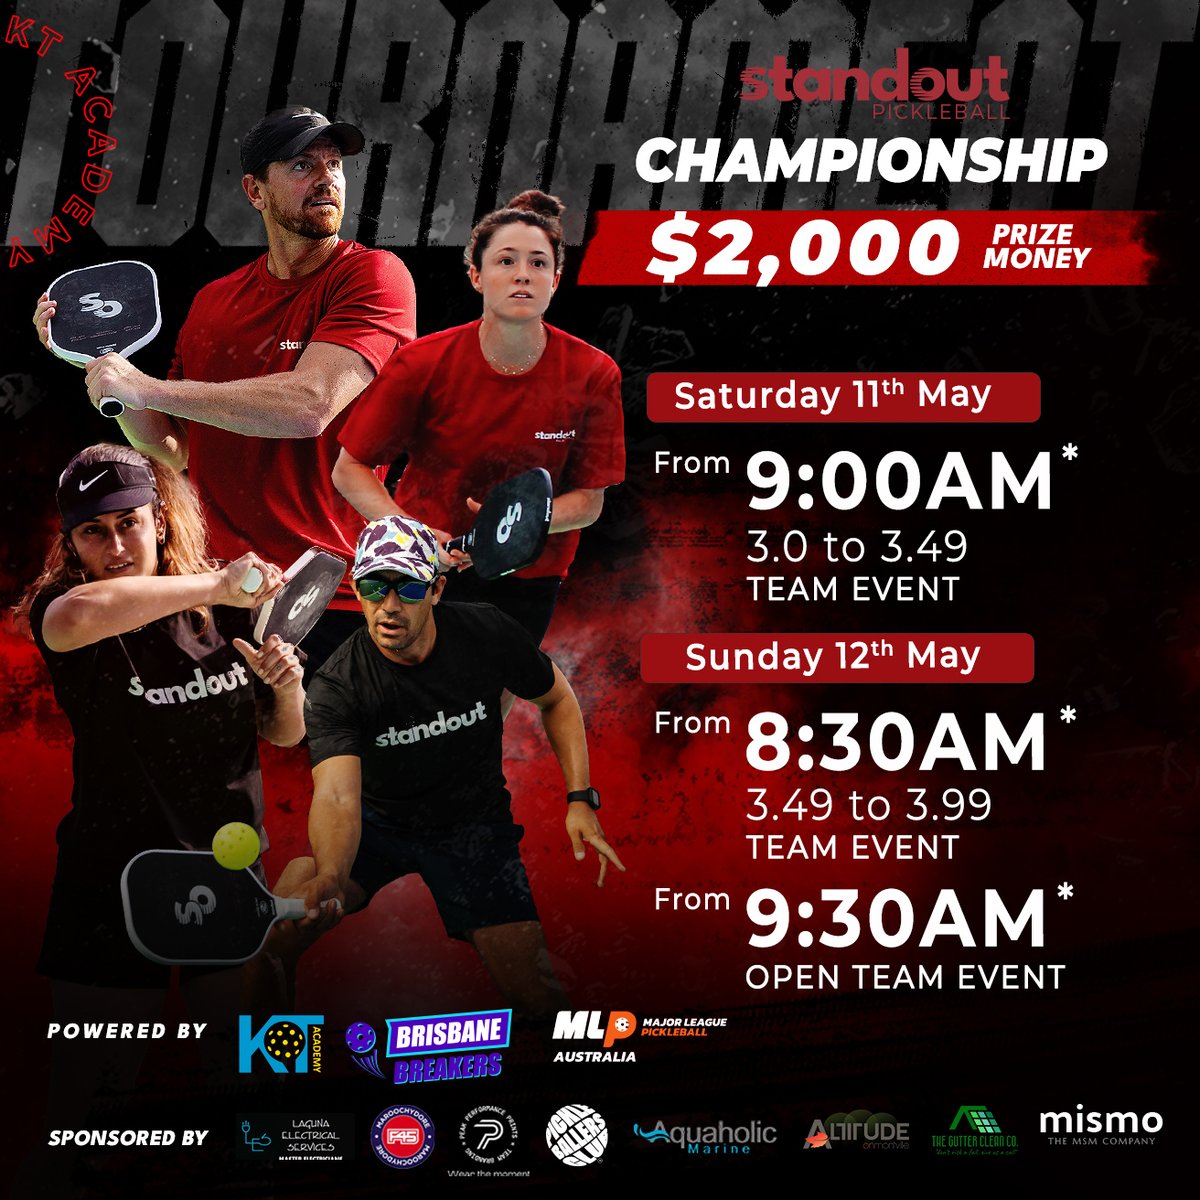 Attention Picklers! Standout Championship start times are confirmed! Register now or regret forever (closes May 5th) 👇🏻
pickleballbrackets.com/ptd.aspx?eid=3…

#StandoutPickleball #standout #PickleballPassion #pickleballislife #pickleballaustralia #majorleaguepickleball #MLP #BrisbaneBreakers